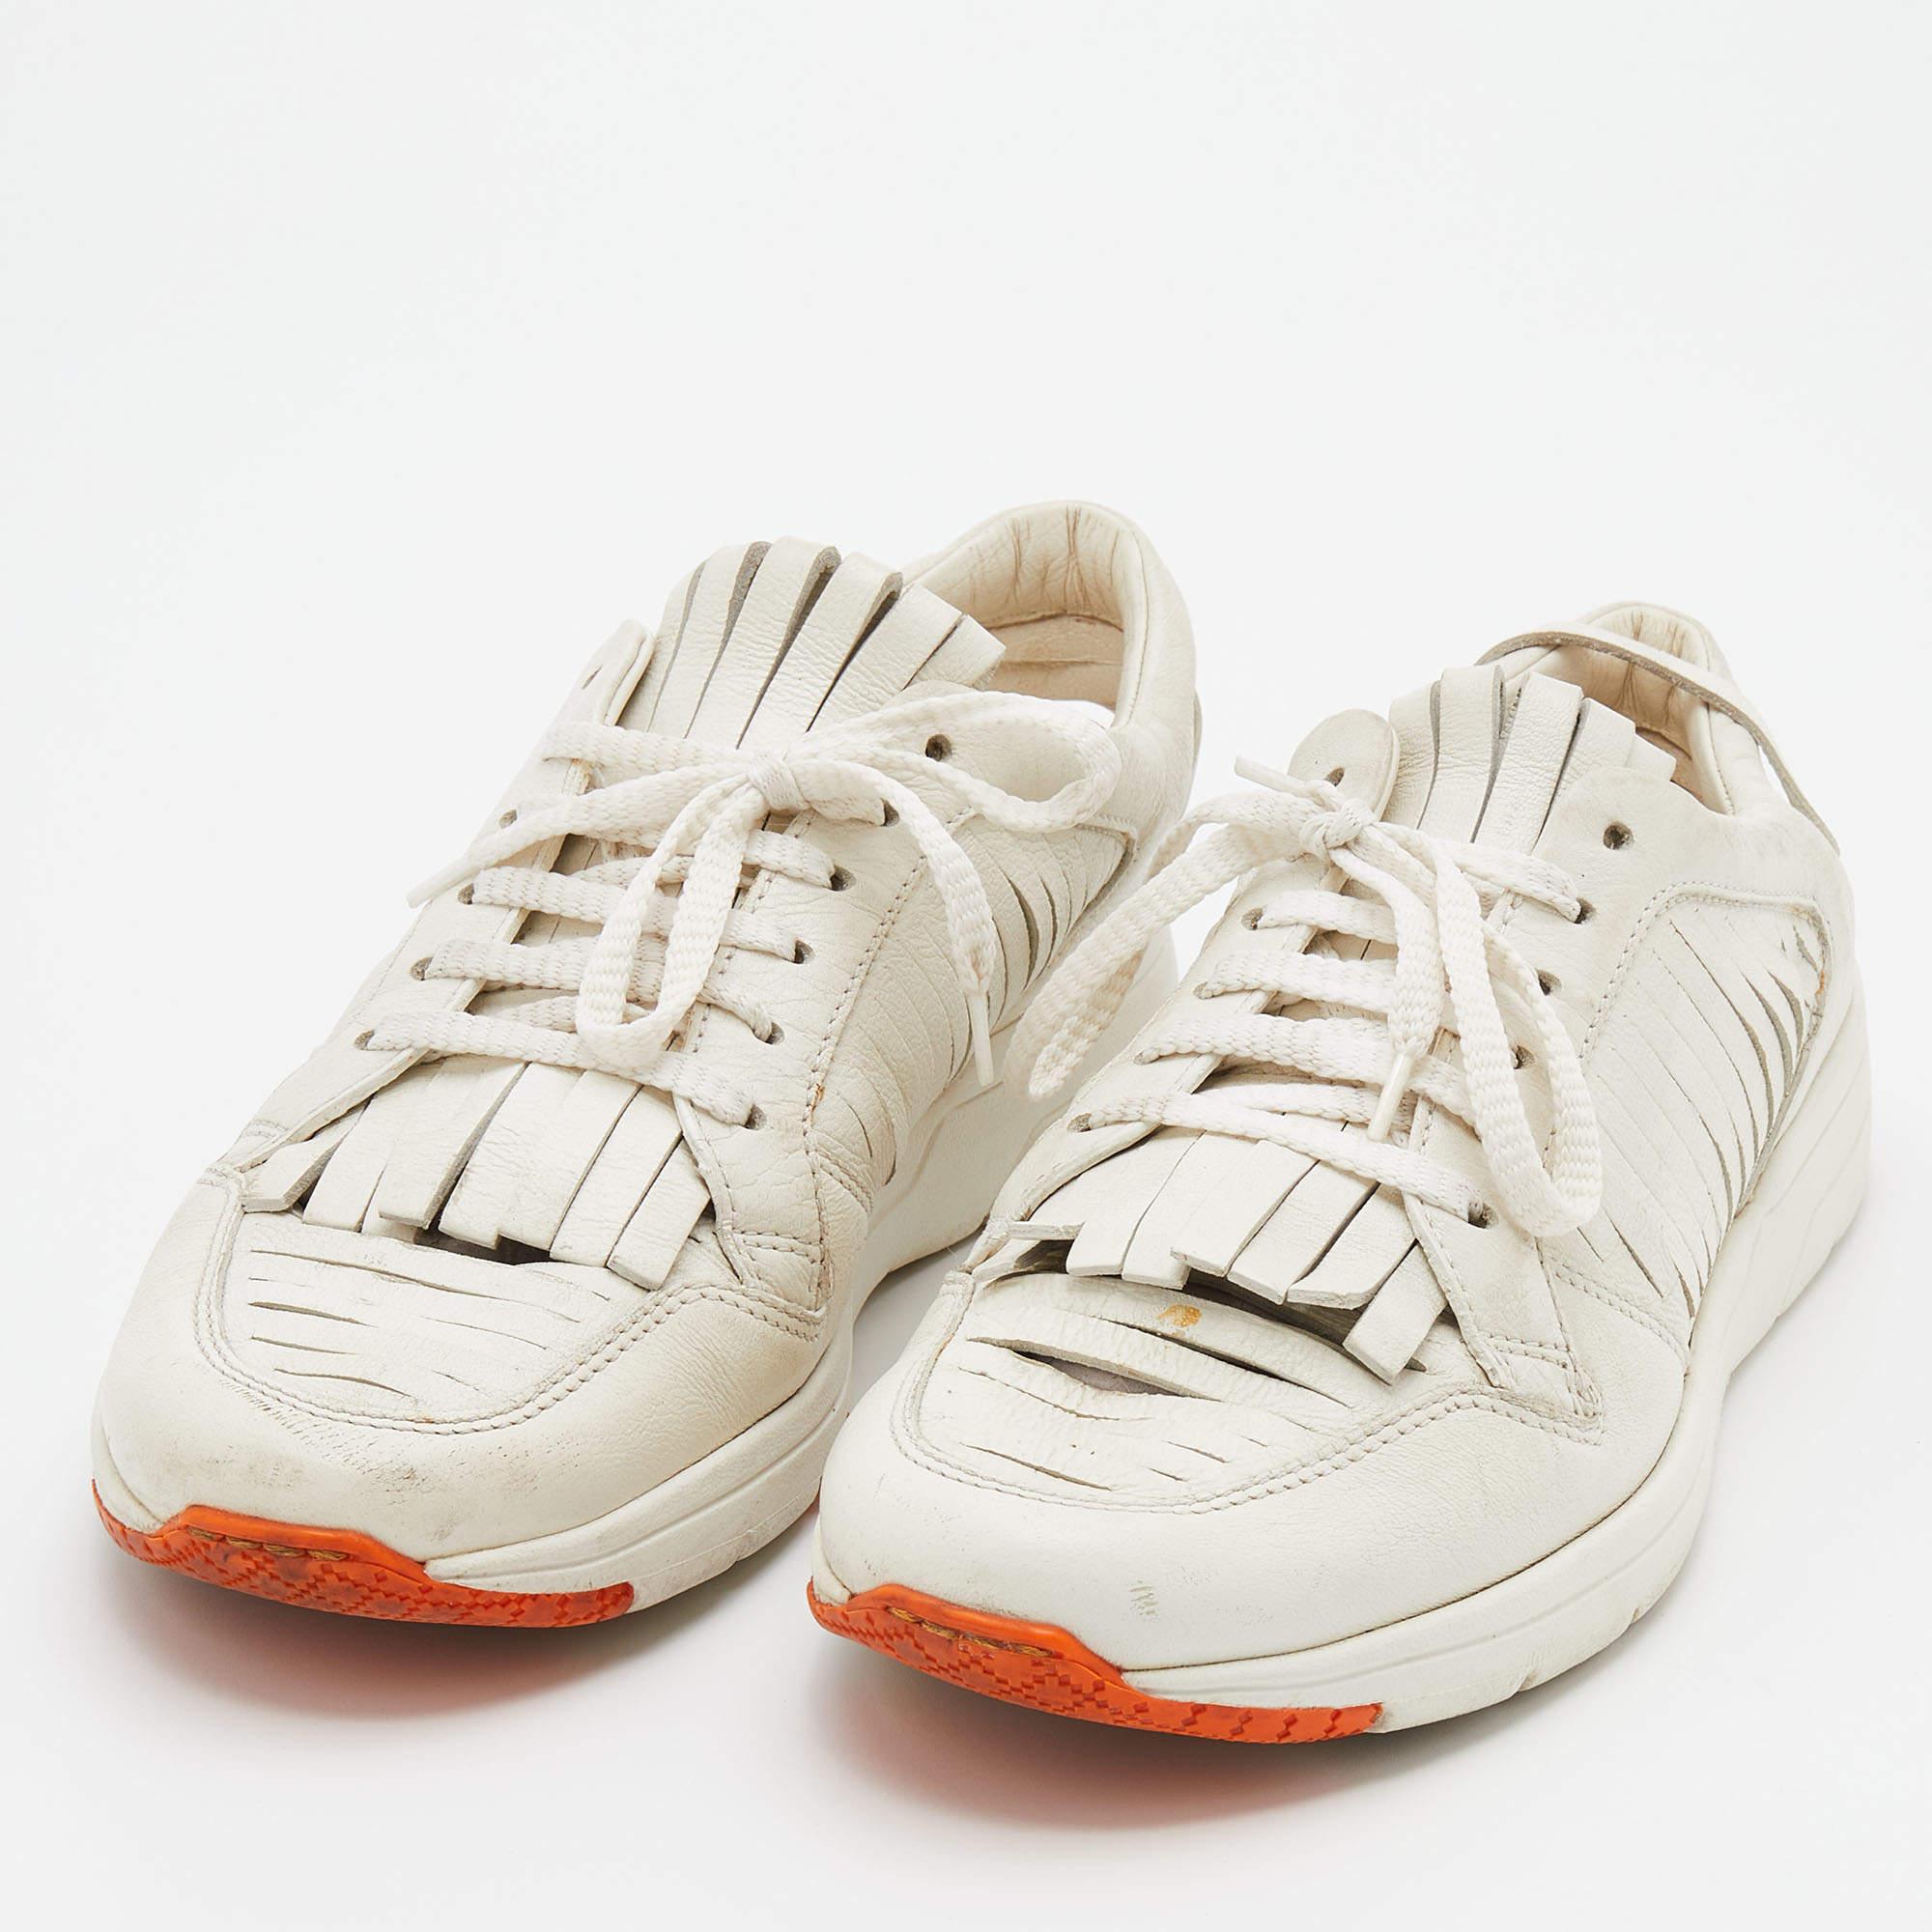 These chic white sneakers by Gucci are just what you need to grace your look. Crafted with leather, this pair comes with lace-ups accompanied by tassel detailing. It has snug insoles and is complete with durable rubber soles for ultimate comfort.

